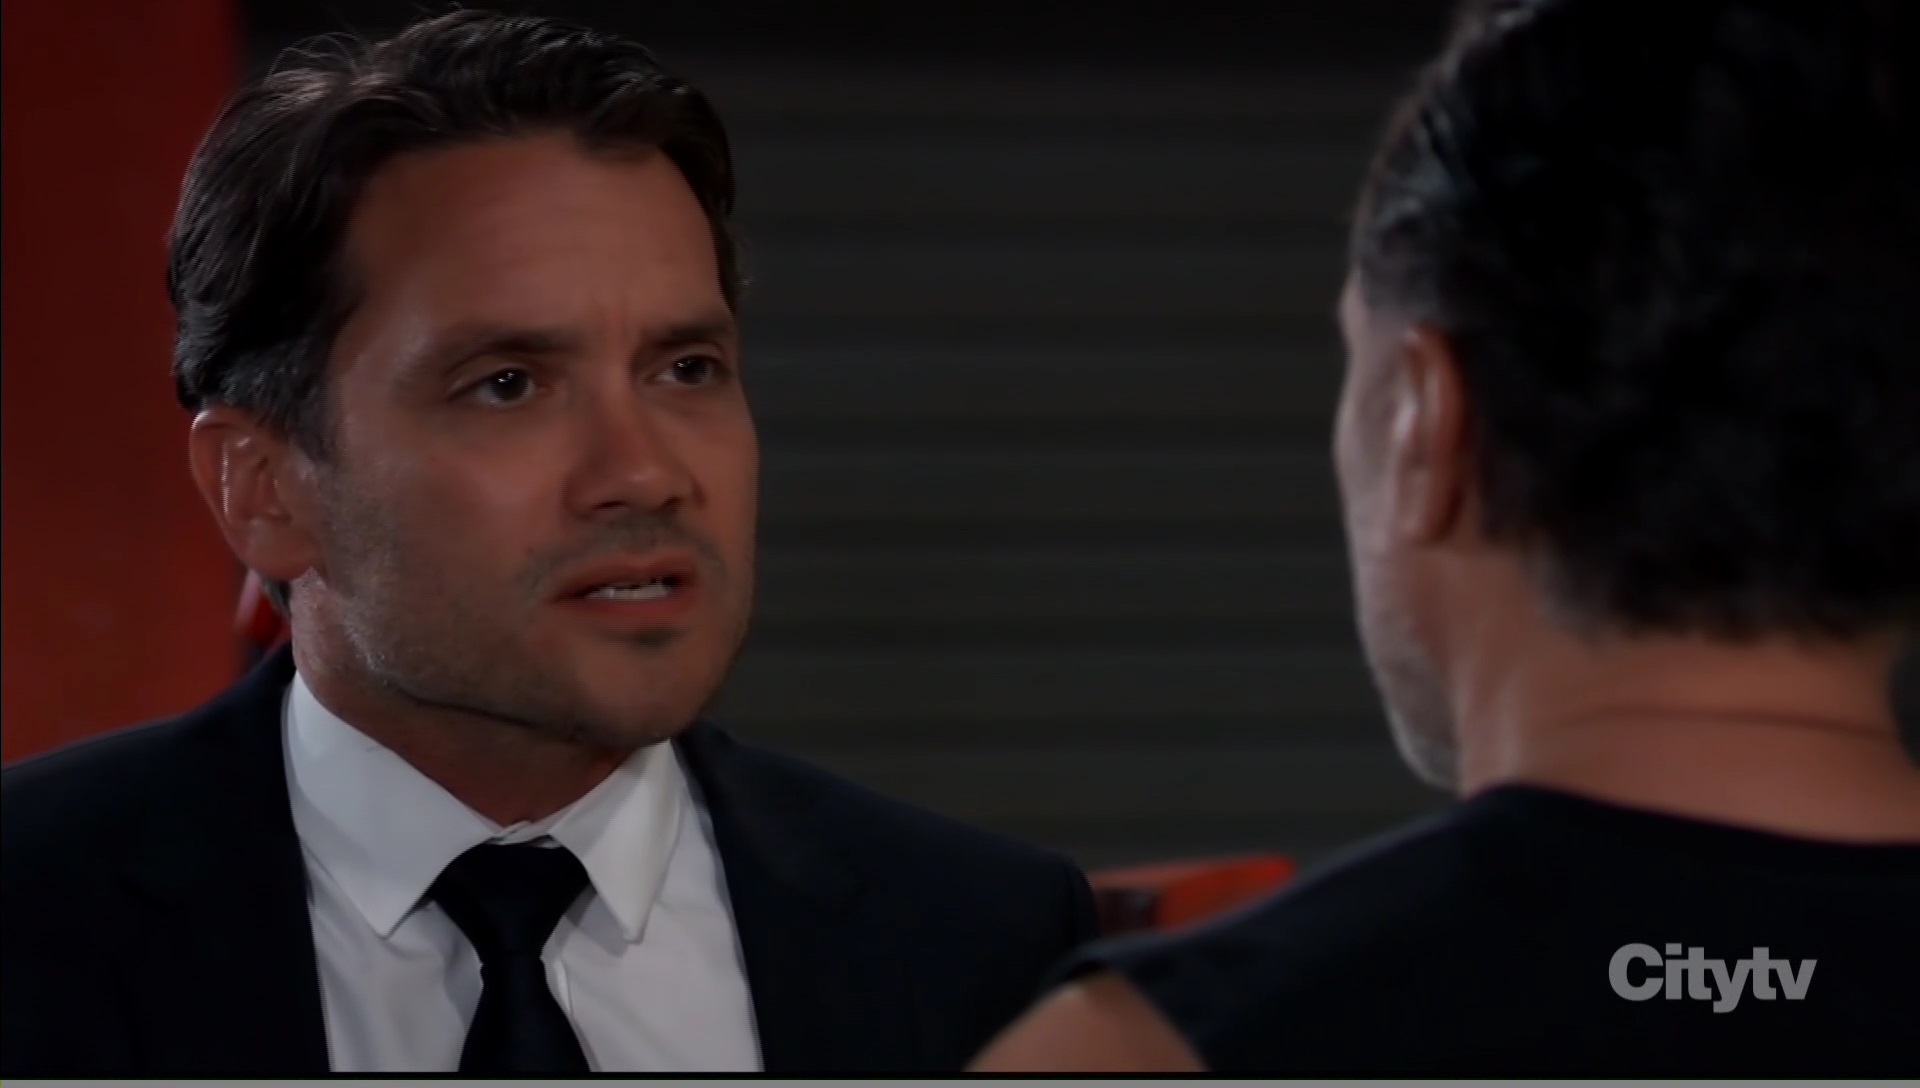 dante tells sonny carly attacked general hospital abc soapsspoilers